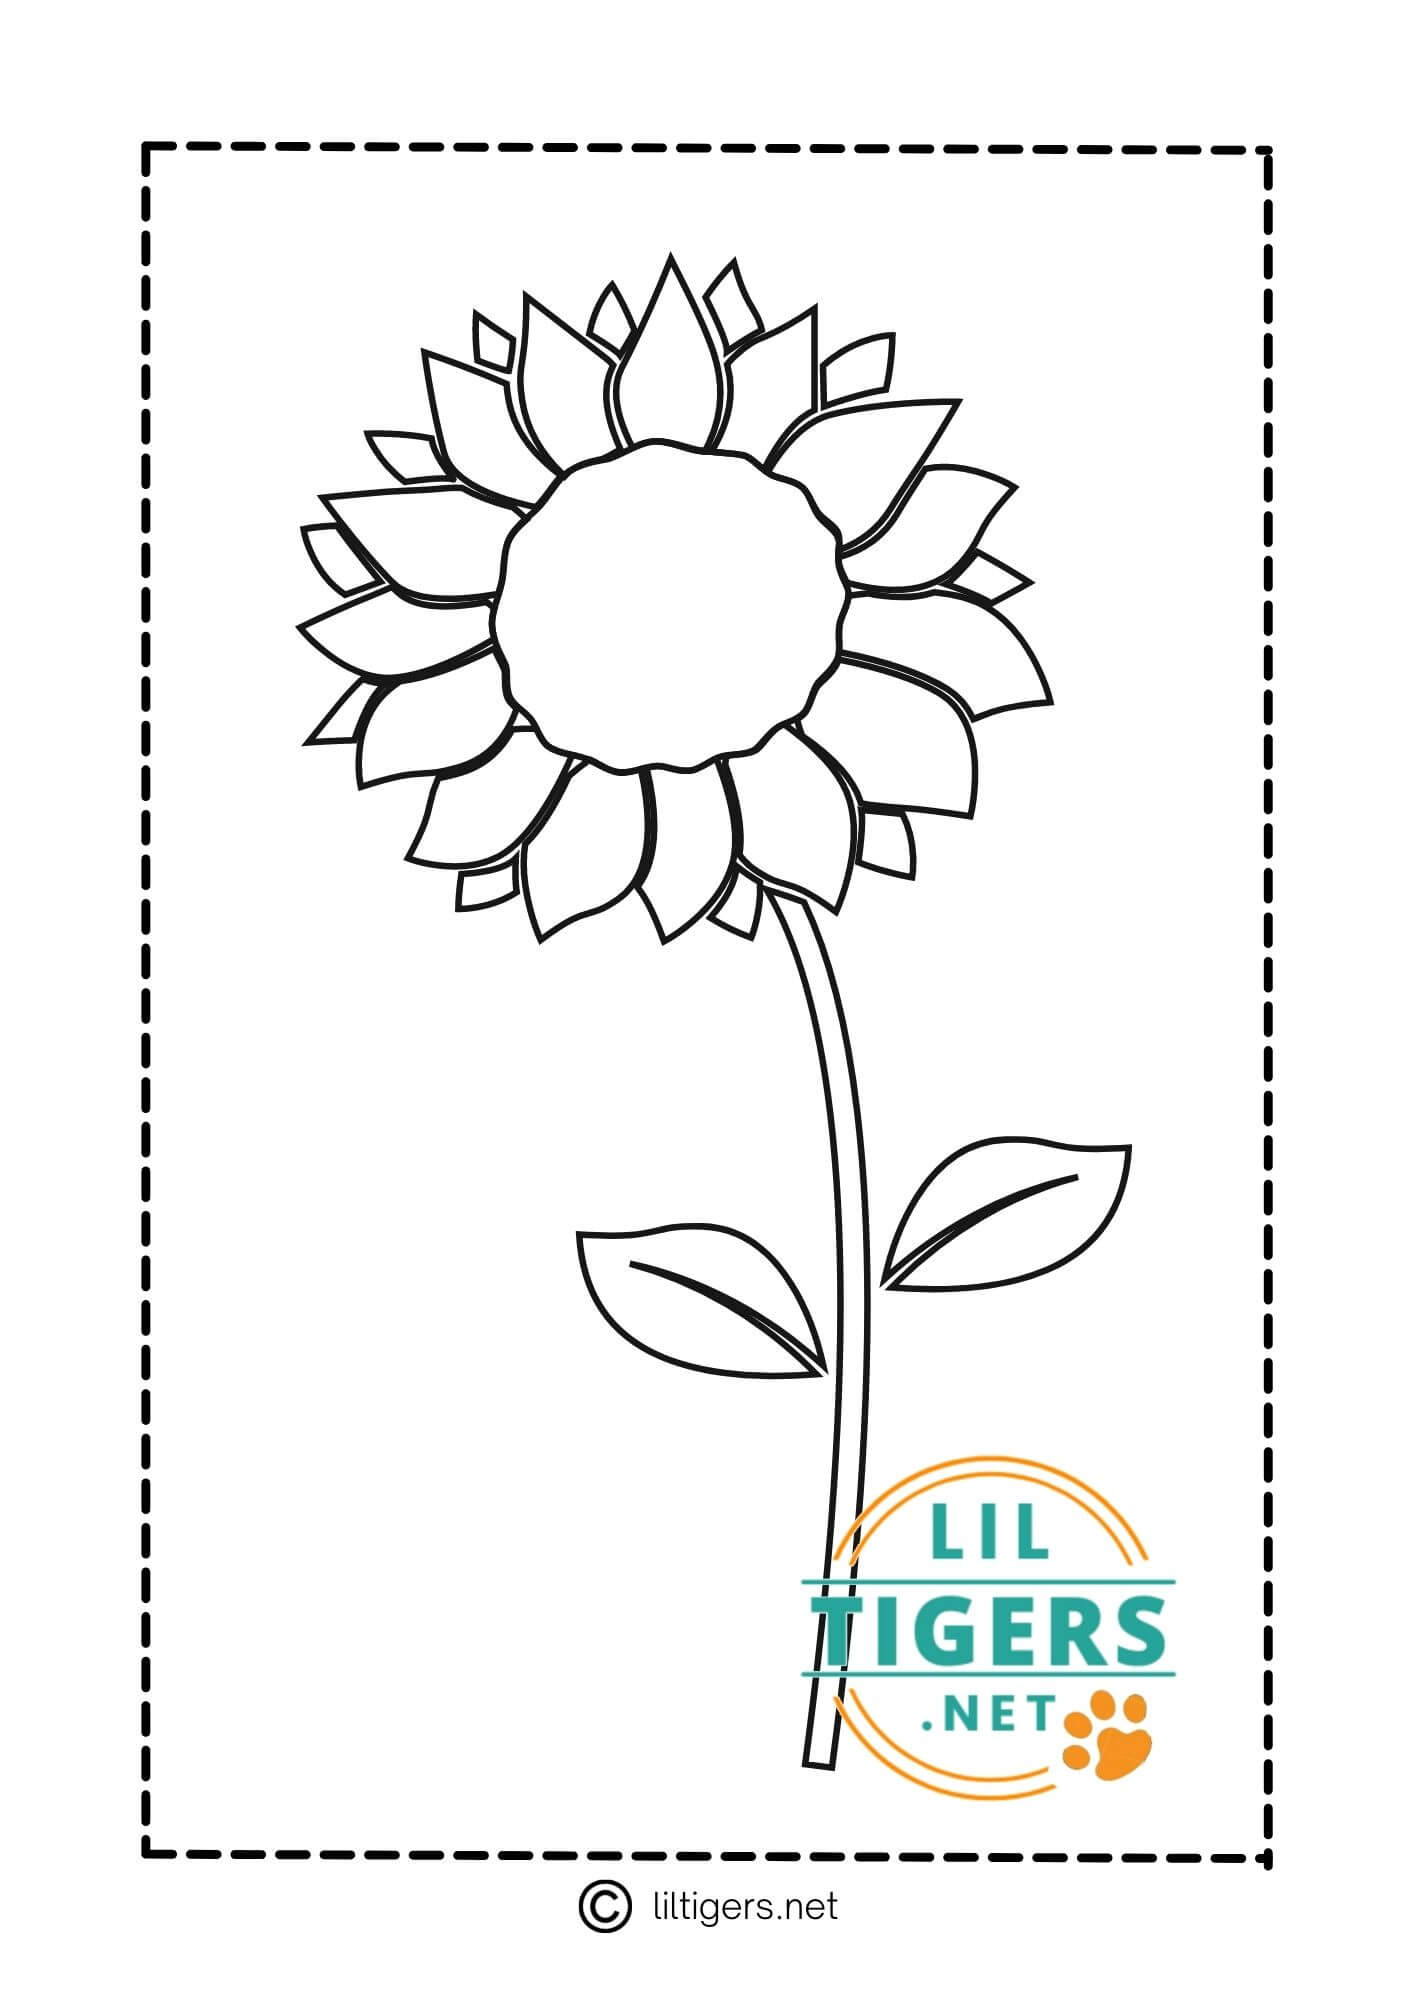 Sunflower Coloring Sheet